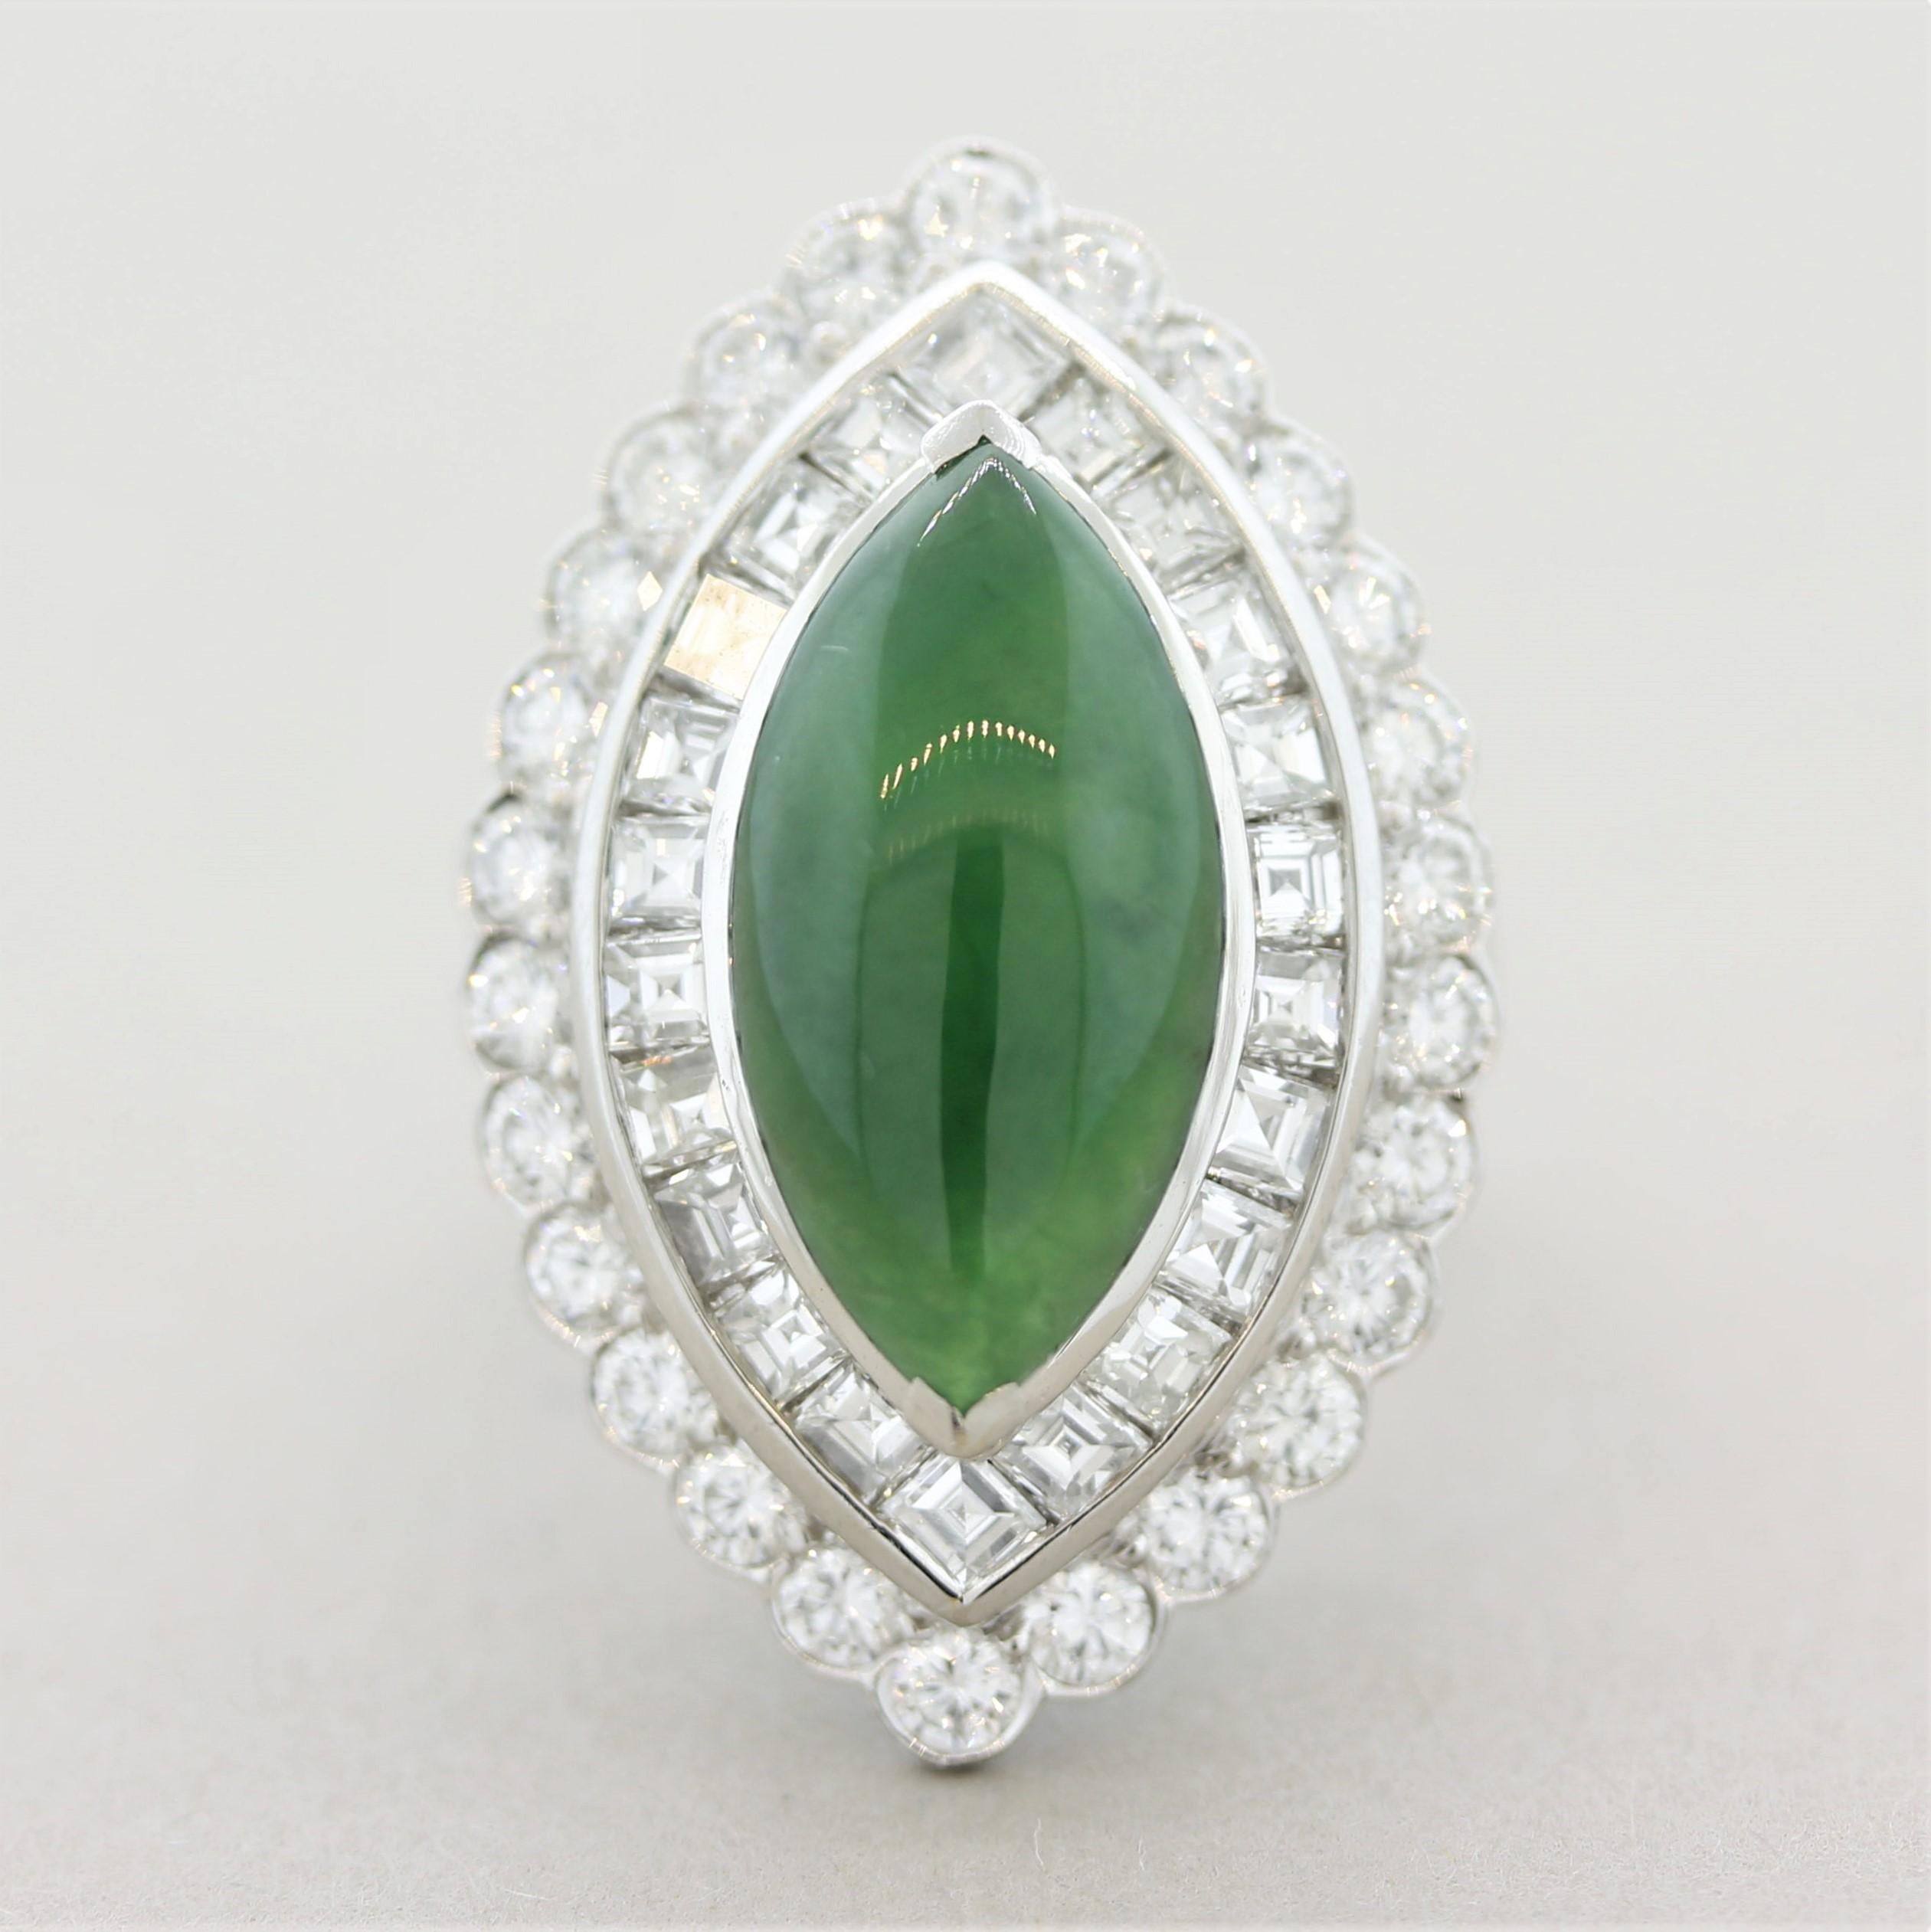 A marquise-shaped natural untreated jade weighing 5.50 carats takes center stage! It has an ideal rich, even green color with excellent luster. It is accented by 3.10 carats of asscher-cut and round brilliant-cut diamonds making a double-halo around